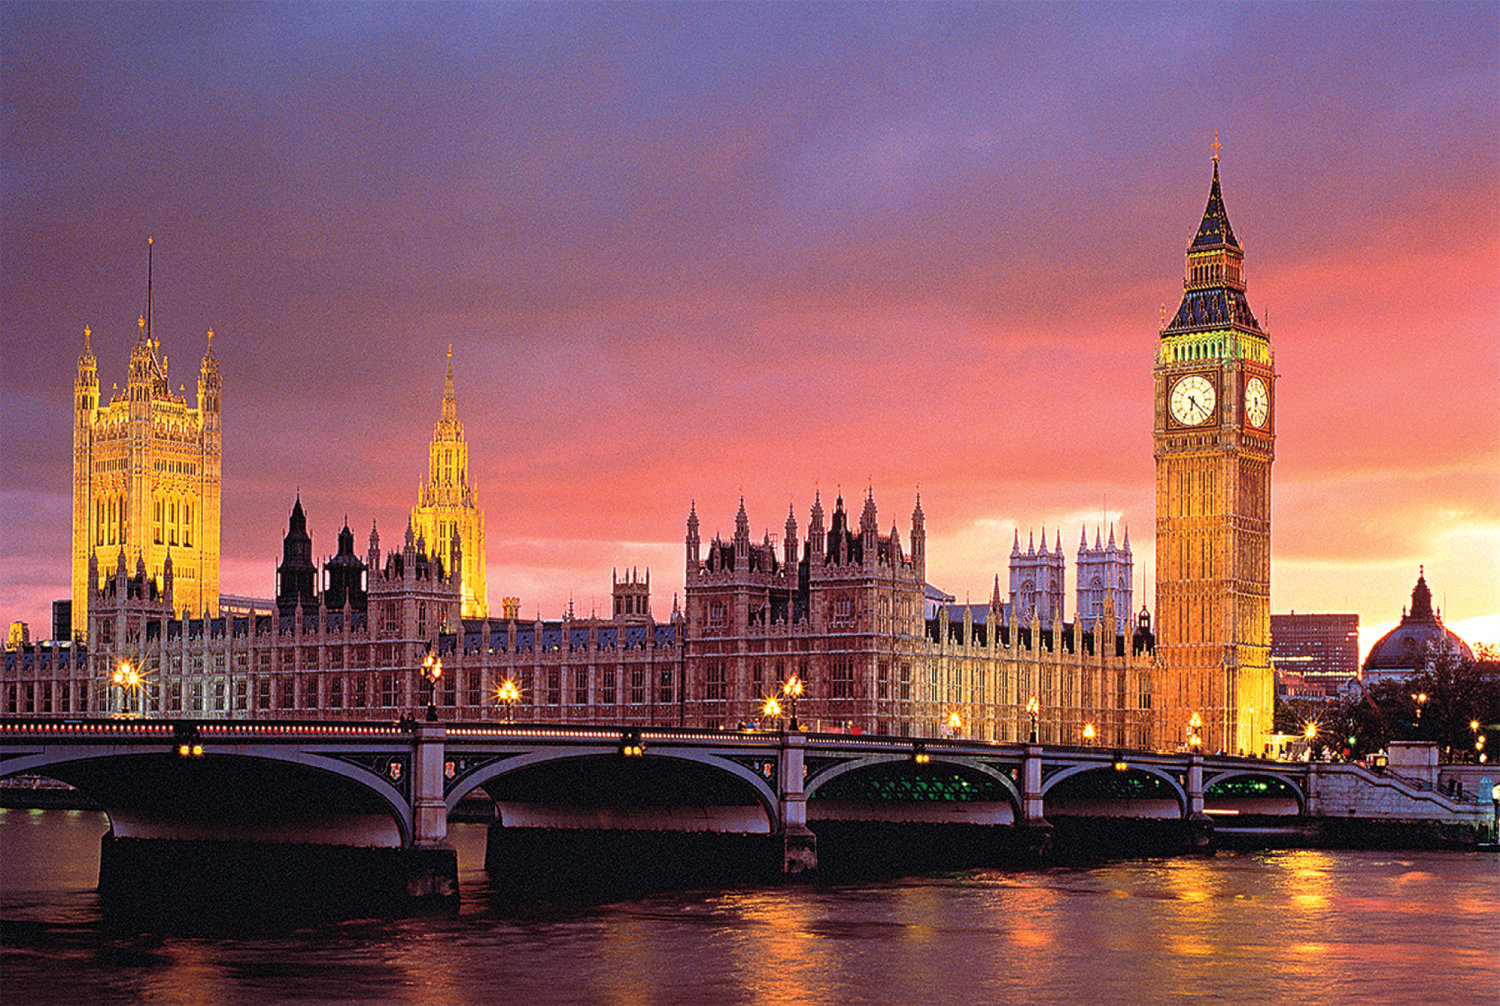 House Of Parliament, London Landmarks & Monuments Jigsaw Puzzle